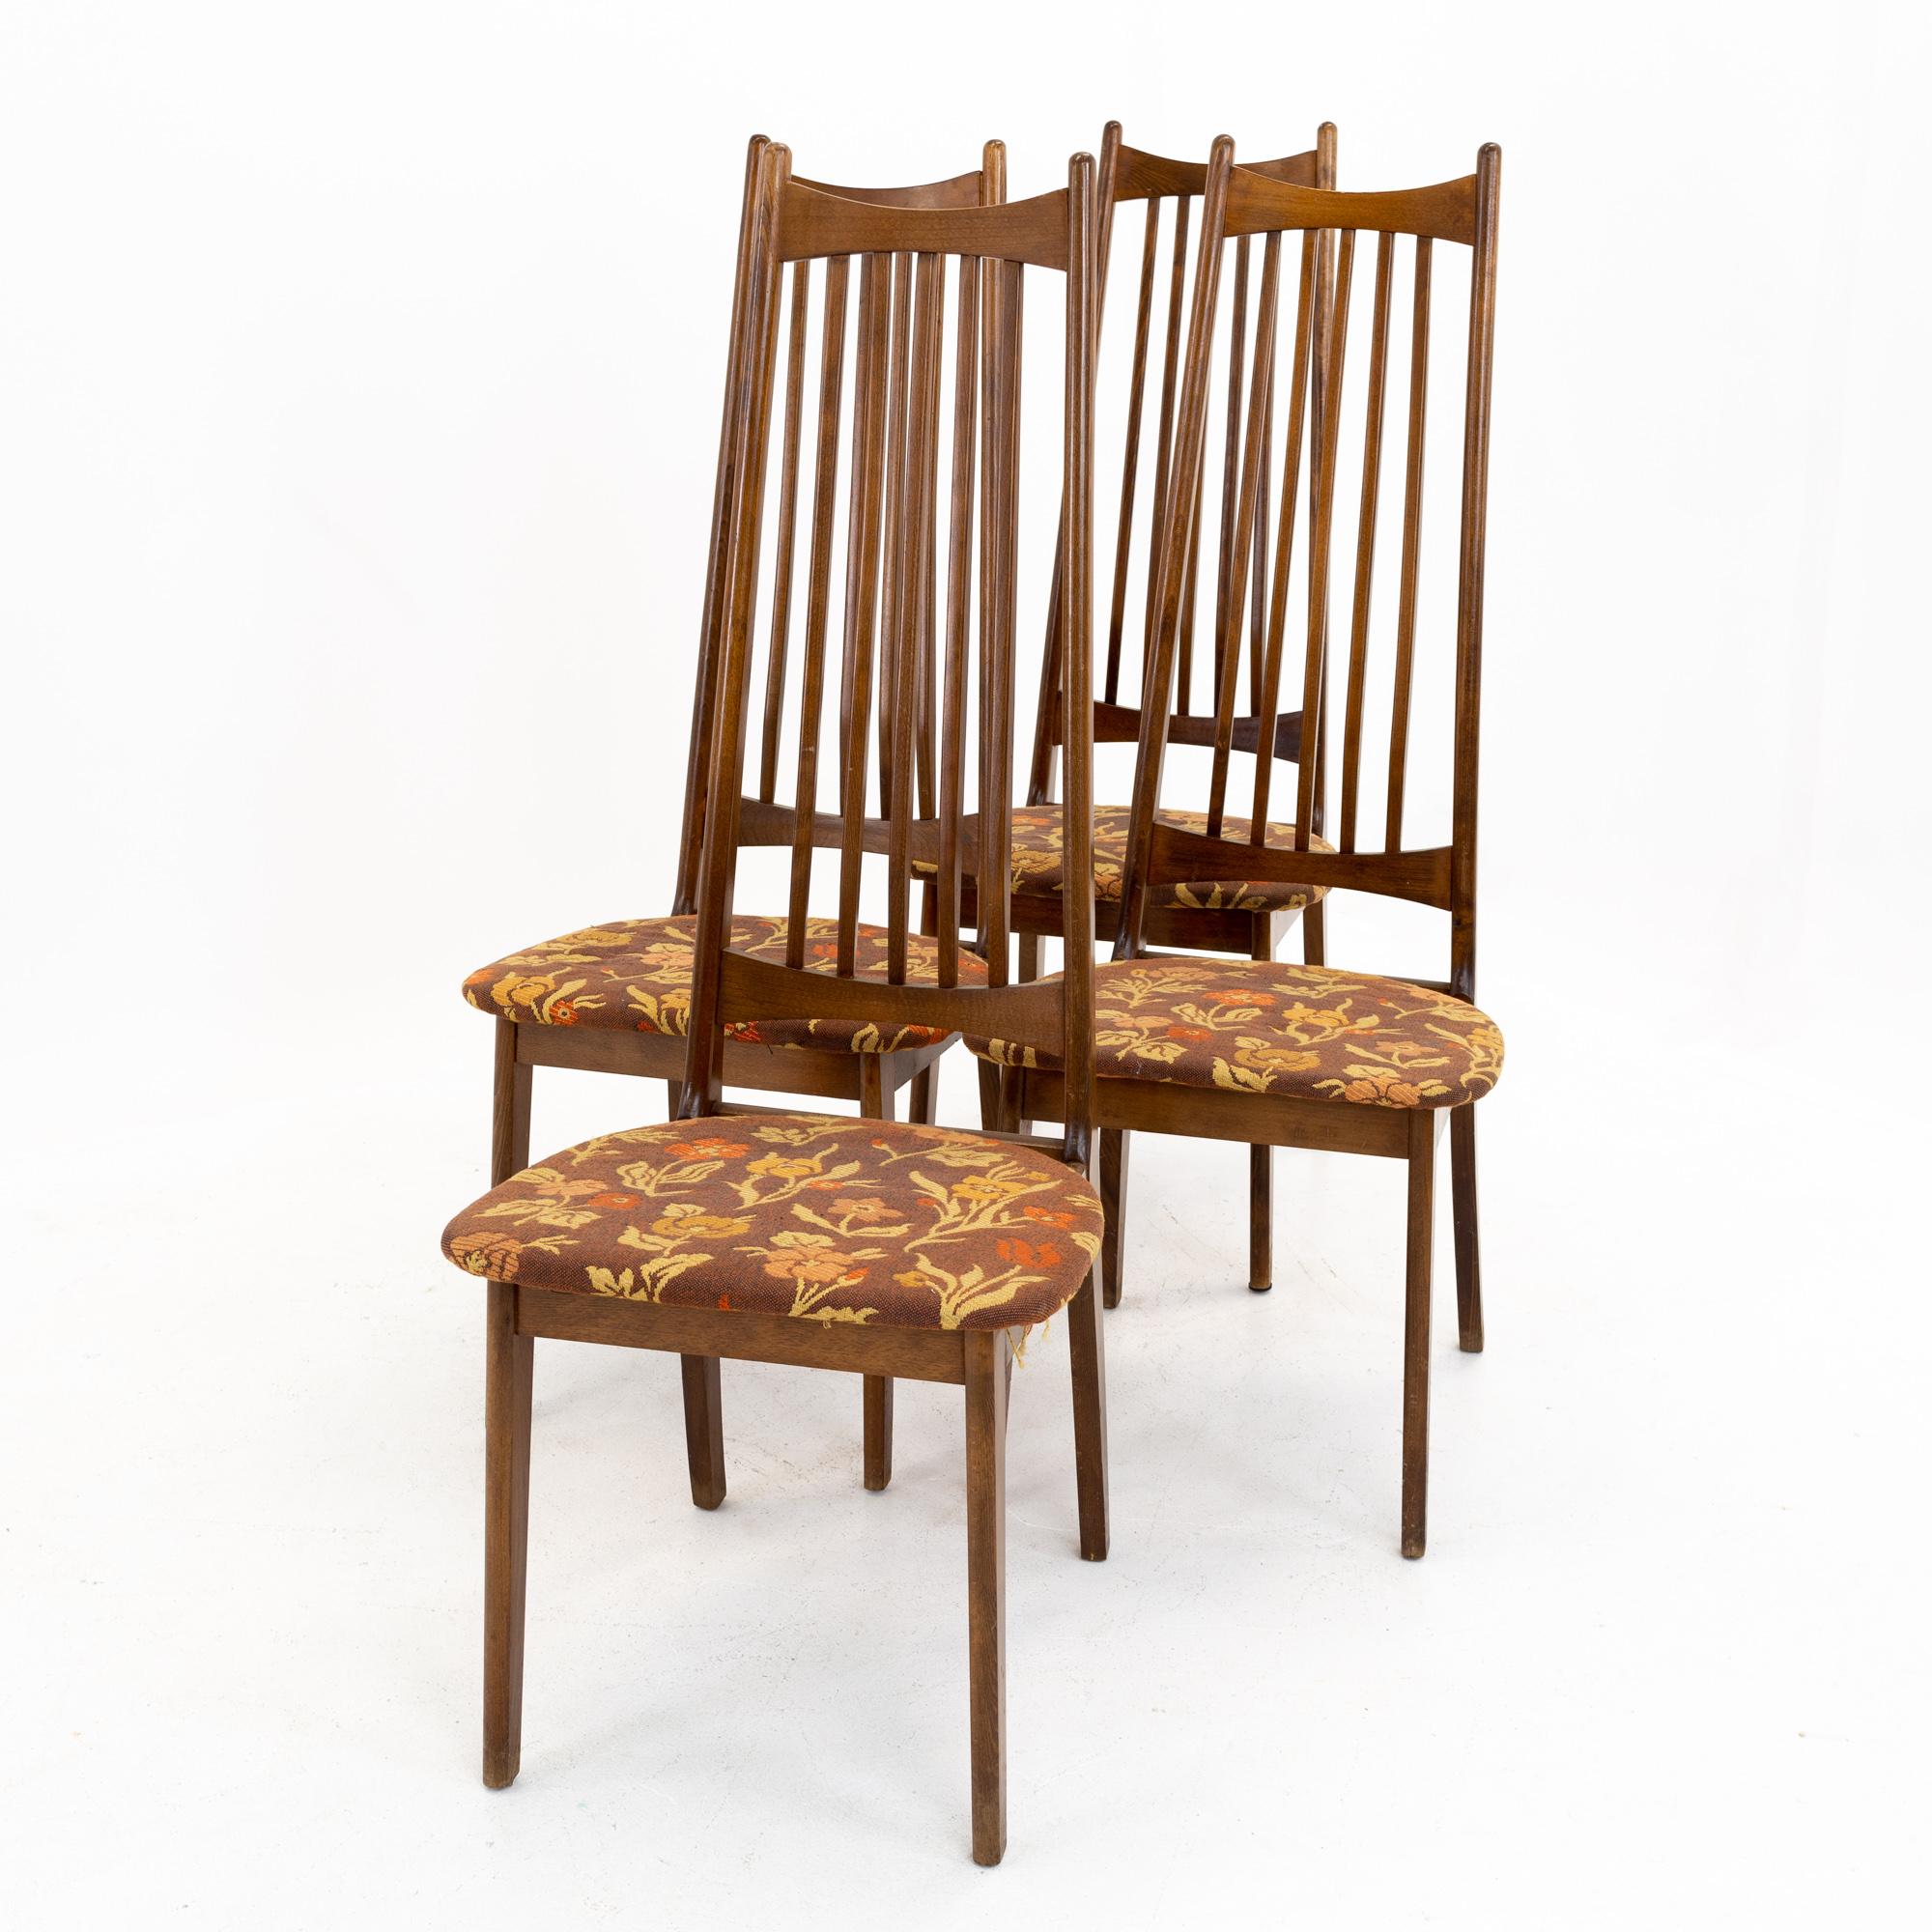 Mid century walnut highback dining chairs - set of 4
These chairs are 18 wide x 20 deep x 46 inches high, with a seat height of 17.25 inches

All pieces of furniture can be had in what we call restored vintage condition. That means the piece is